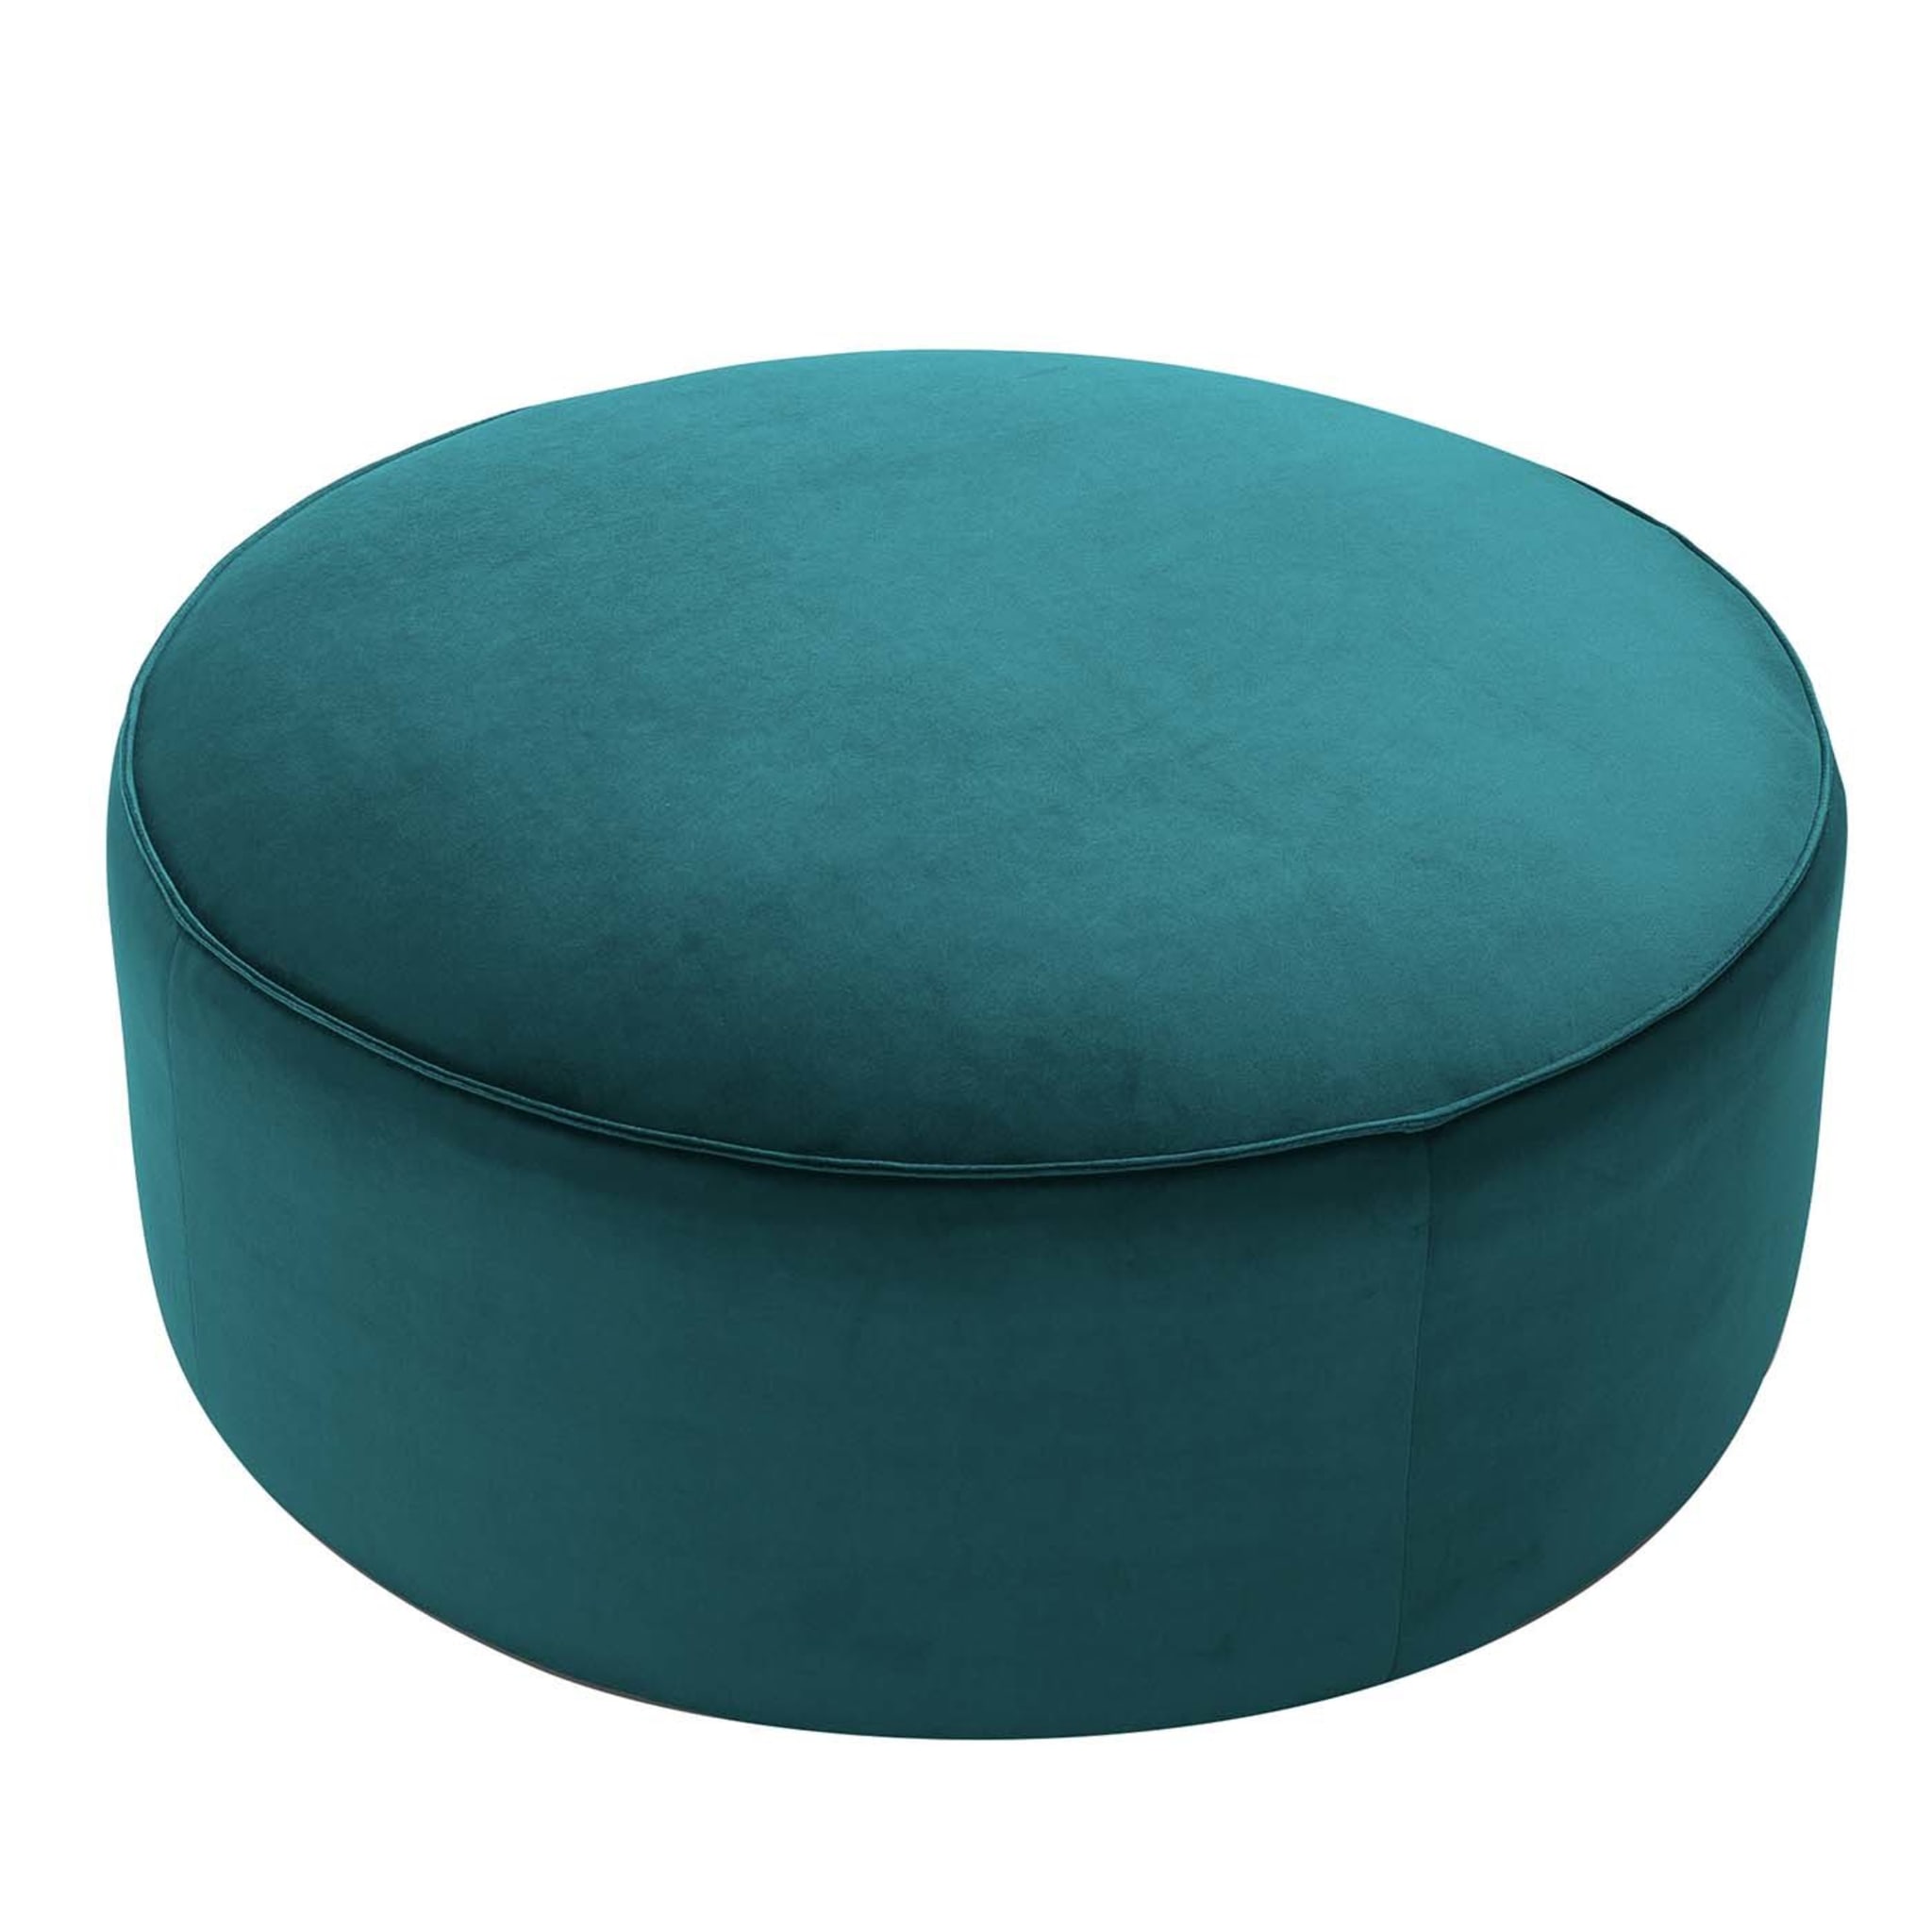 Ted Green Round Pouf - Main view